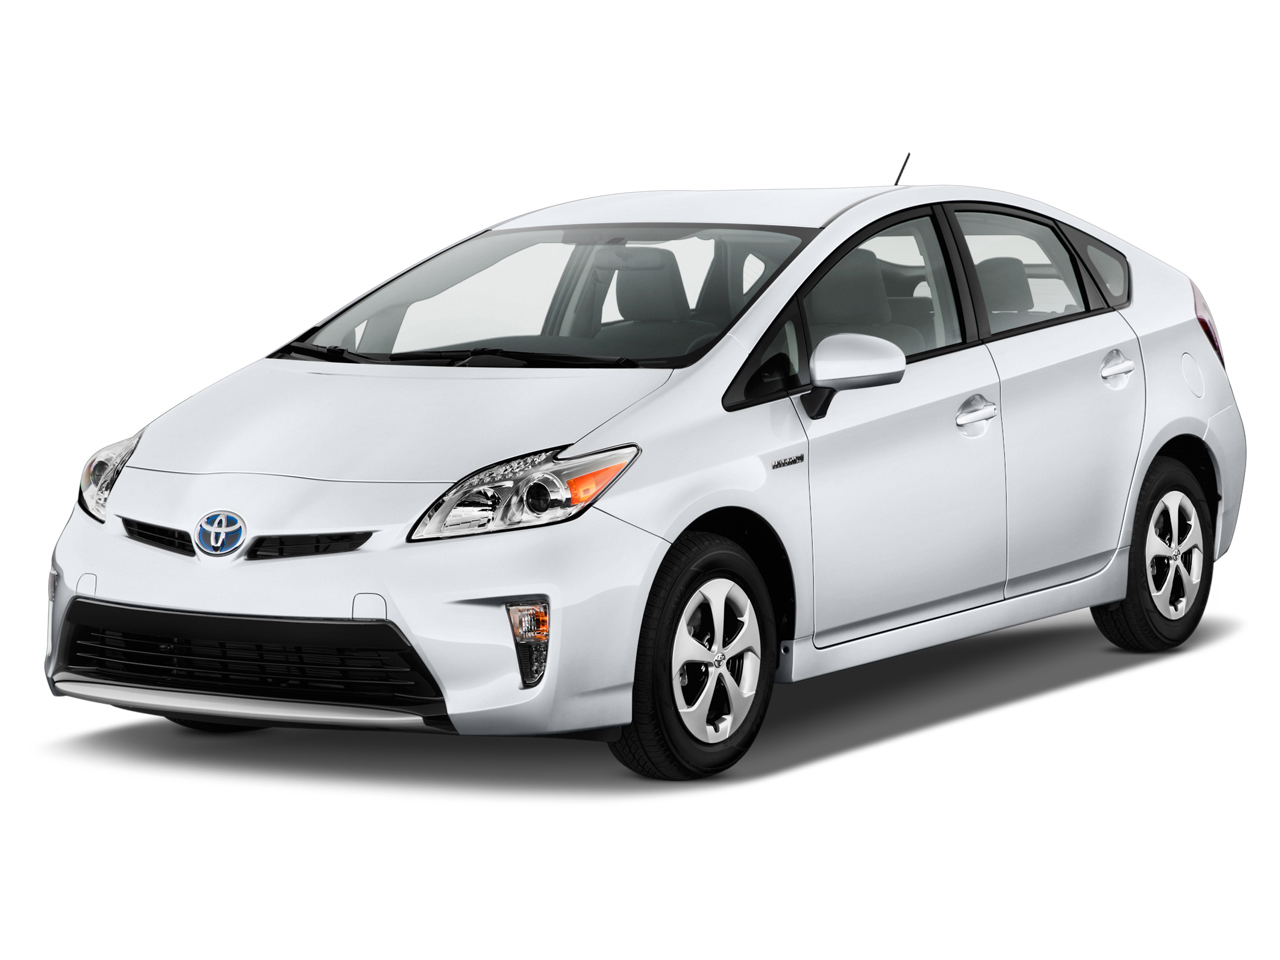 2015 Toyota Prius Review, Ratings, Specs, Prices, and Photos - The Car